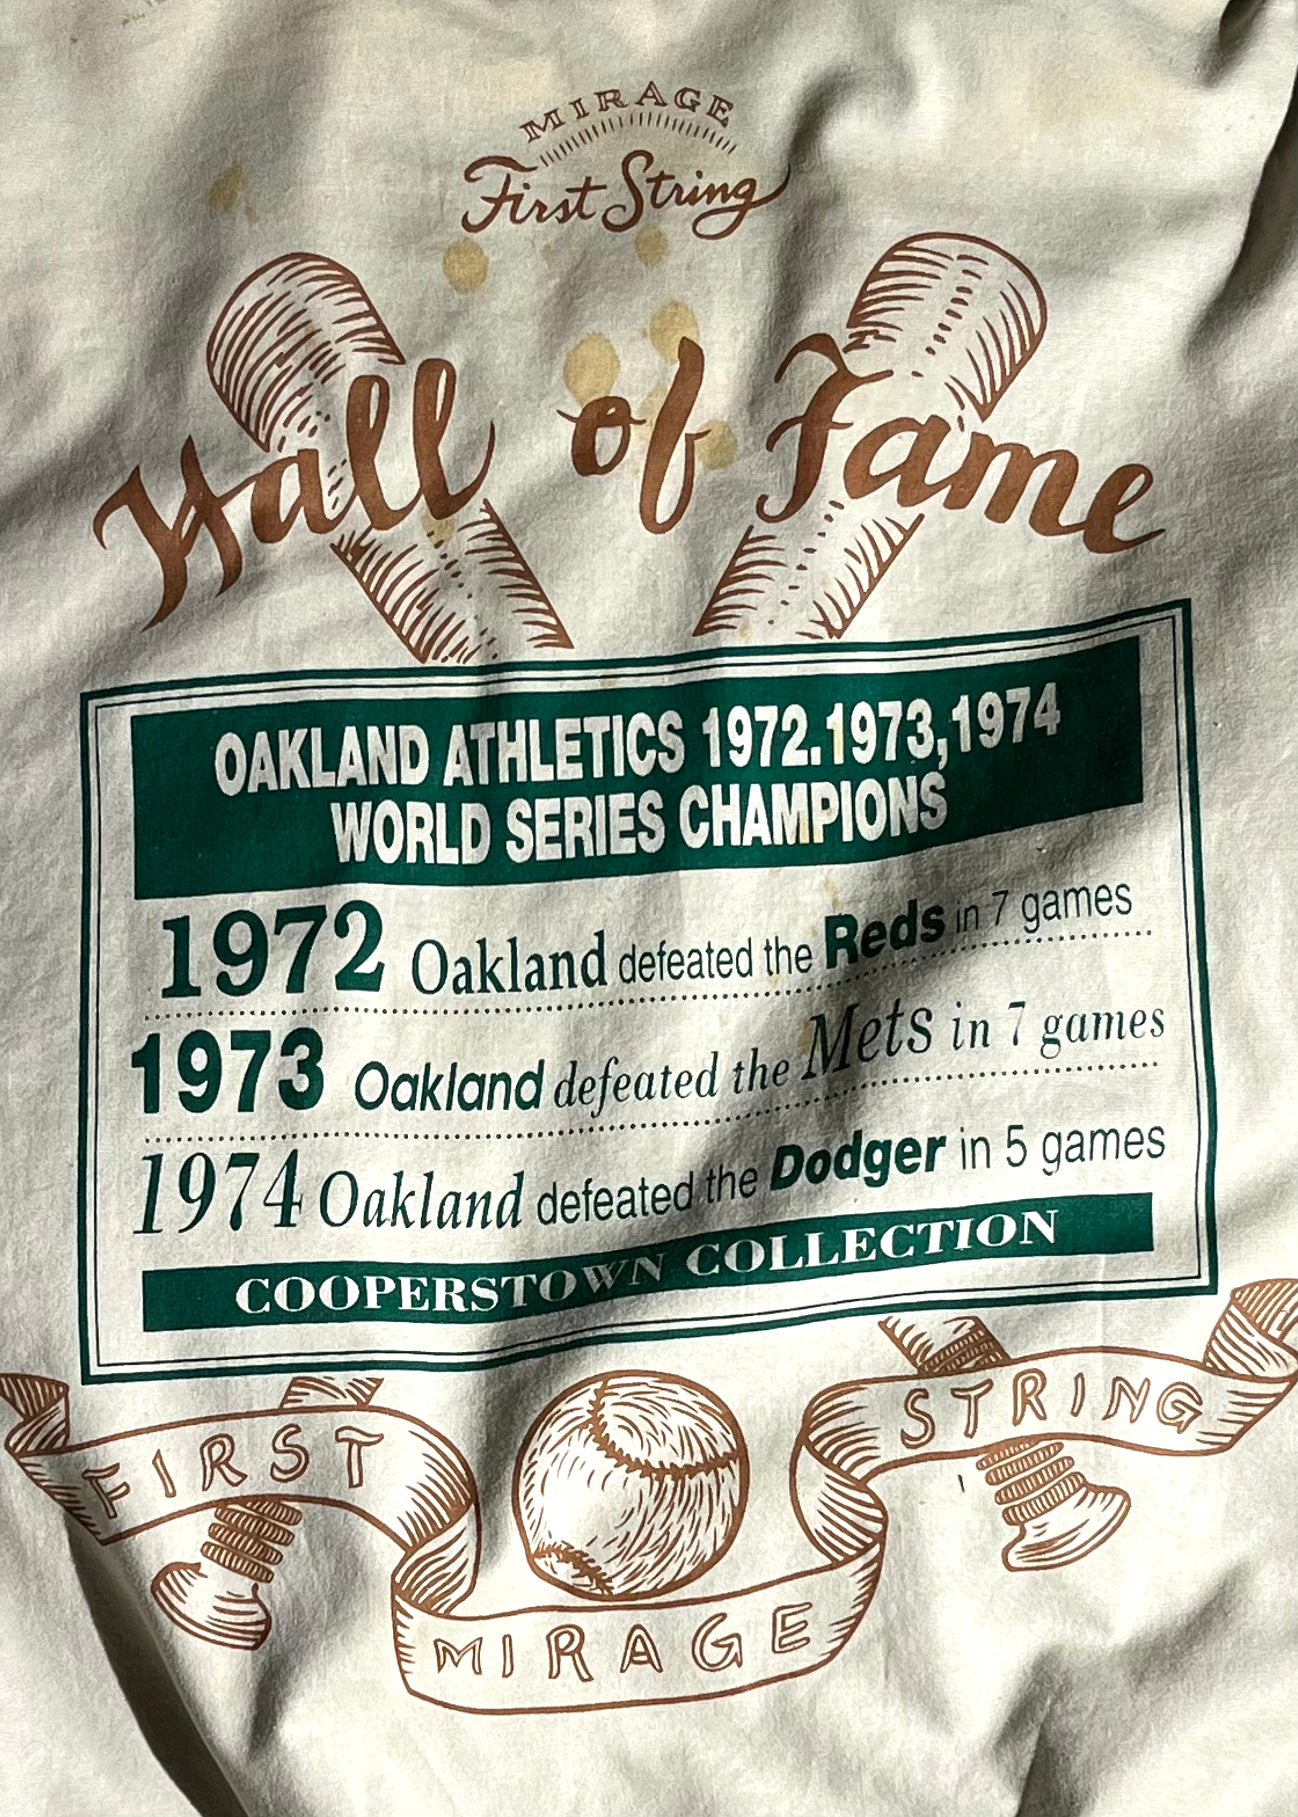 OAKLAND ATHLETICS 1974 Majestic Cooperstown Throwback Jersey